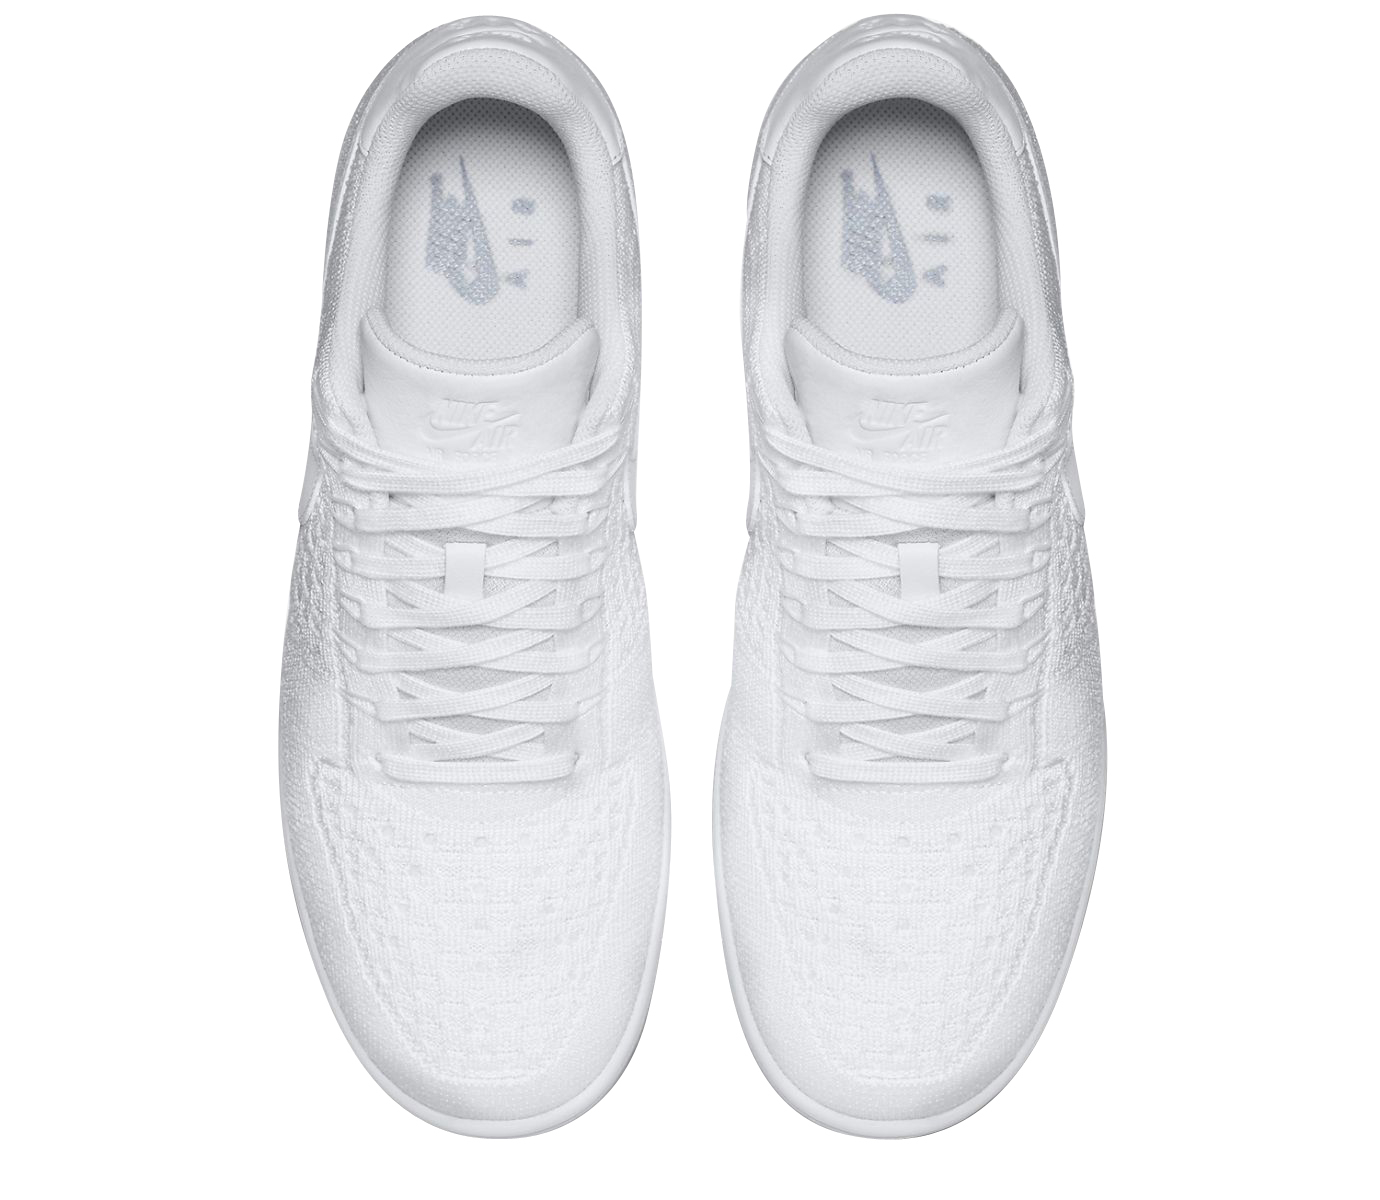 Nike Air Force 1 Ultra Flyknit Low White 817419-100